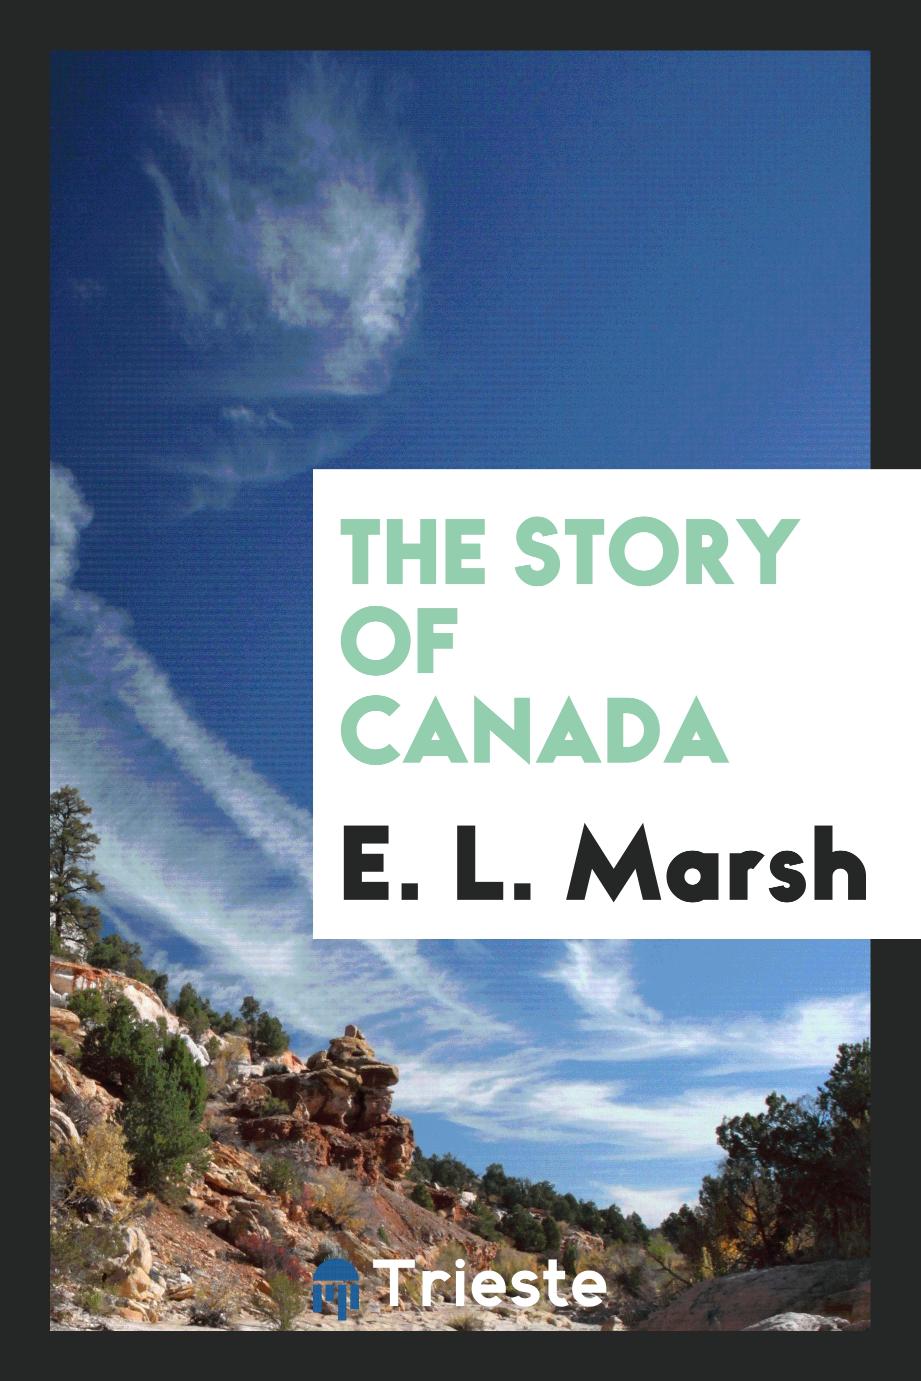 The story of Canada